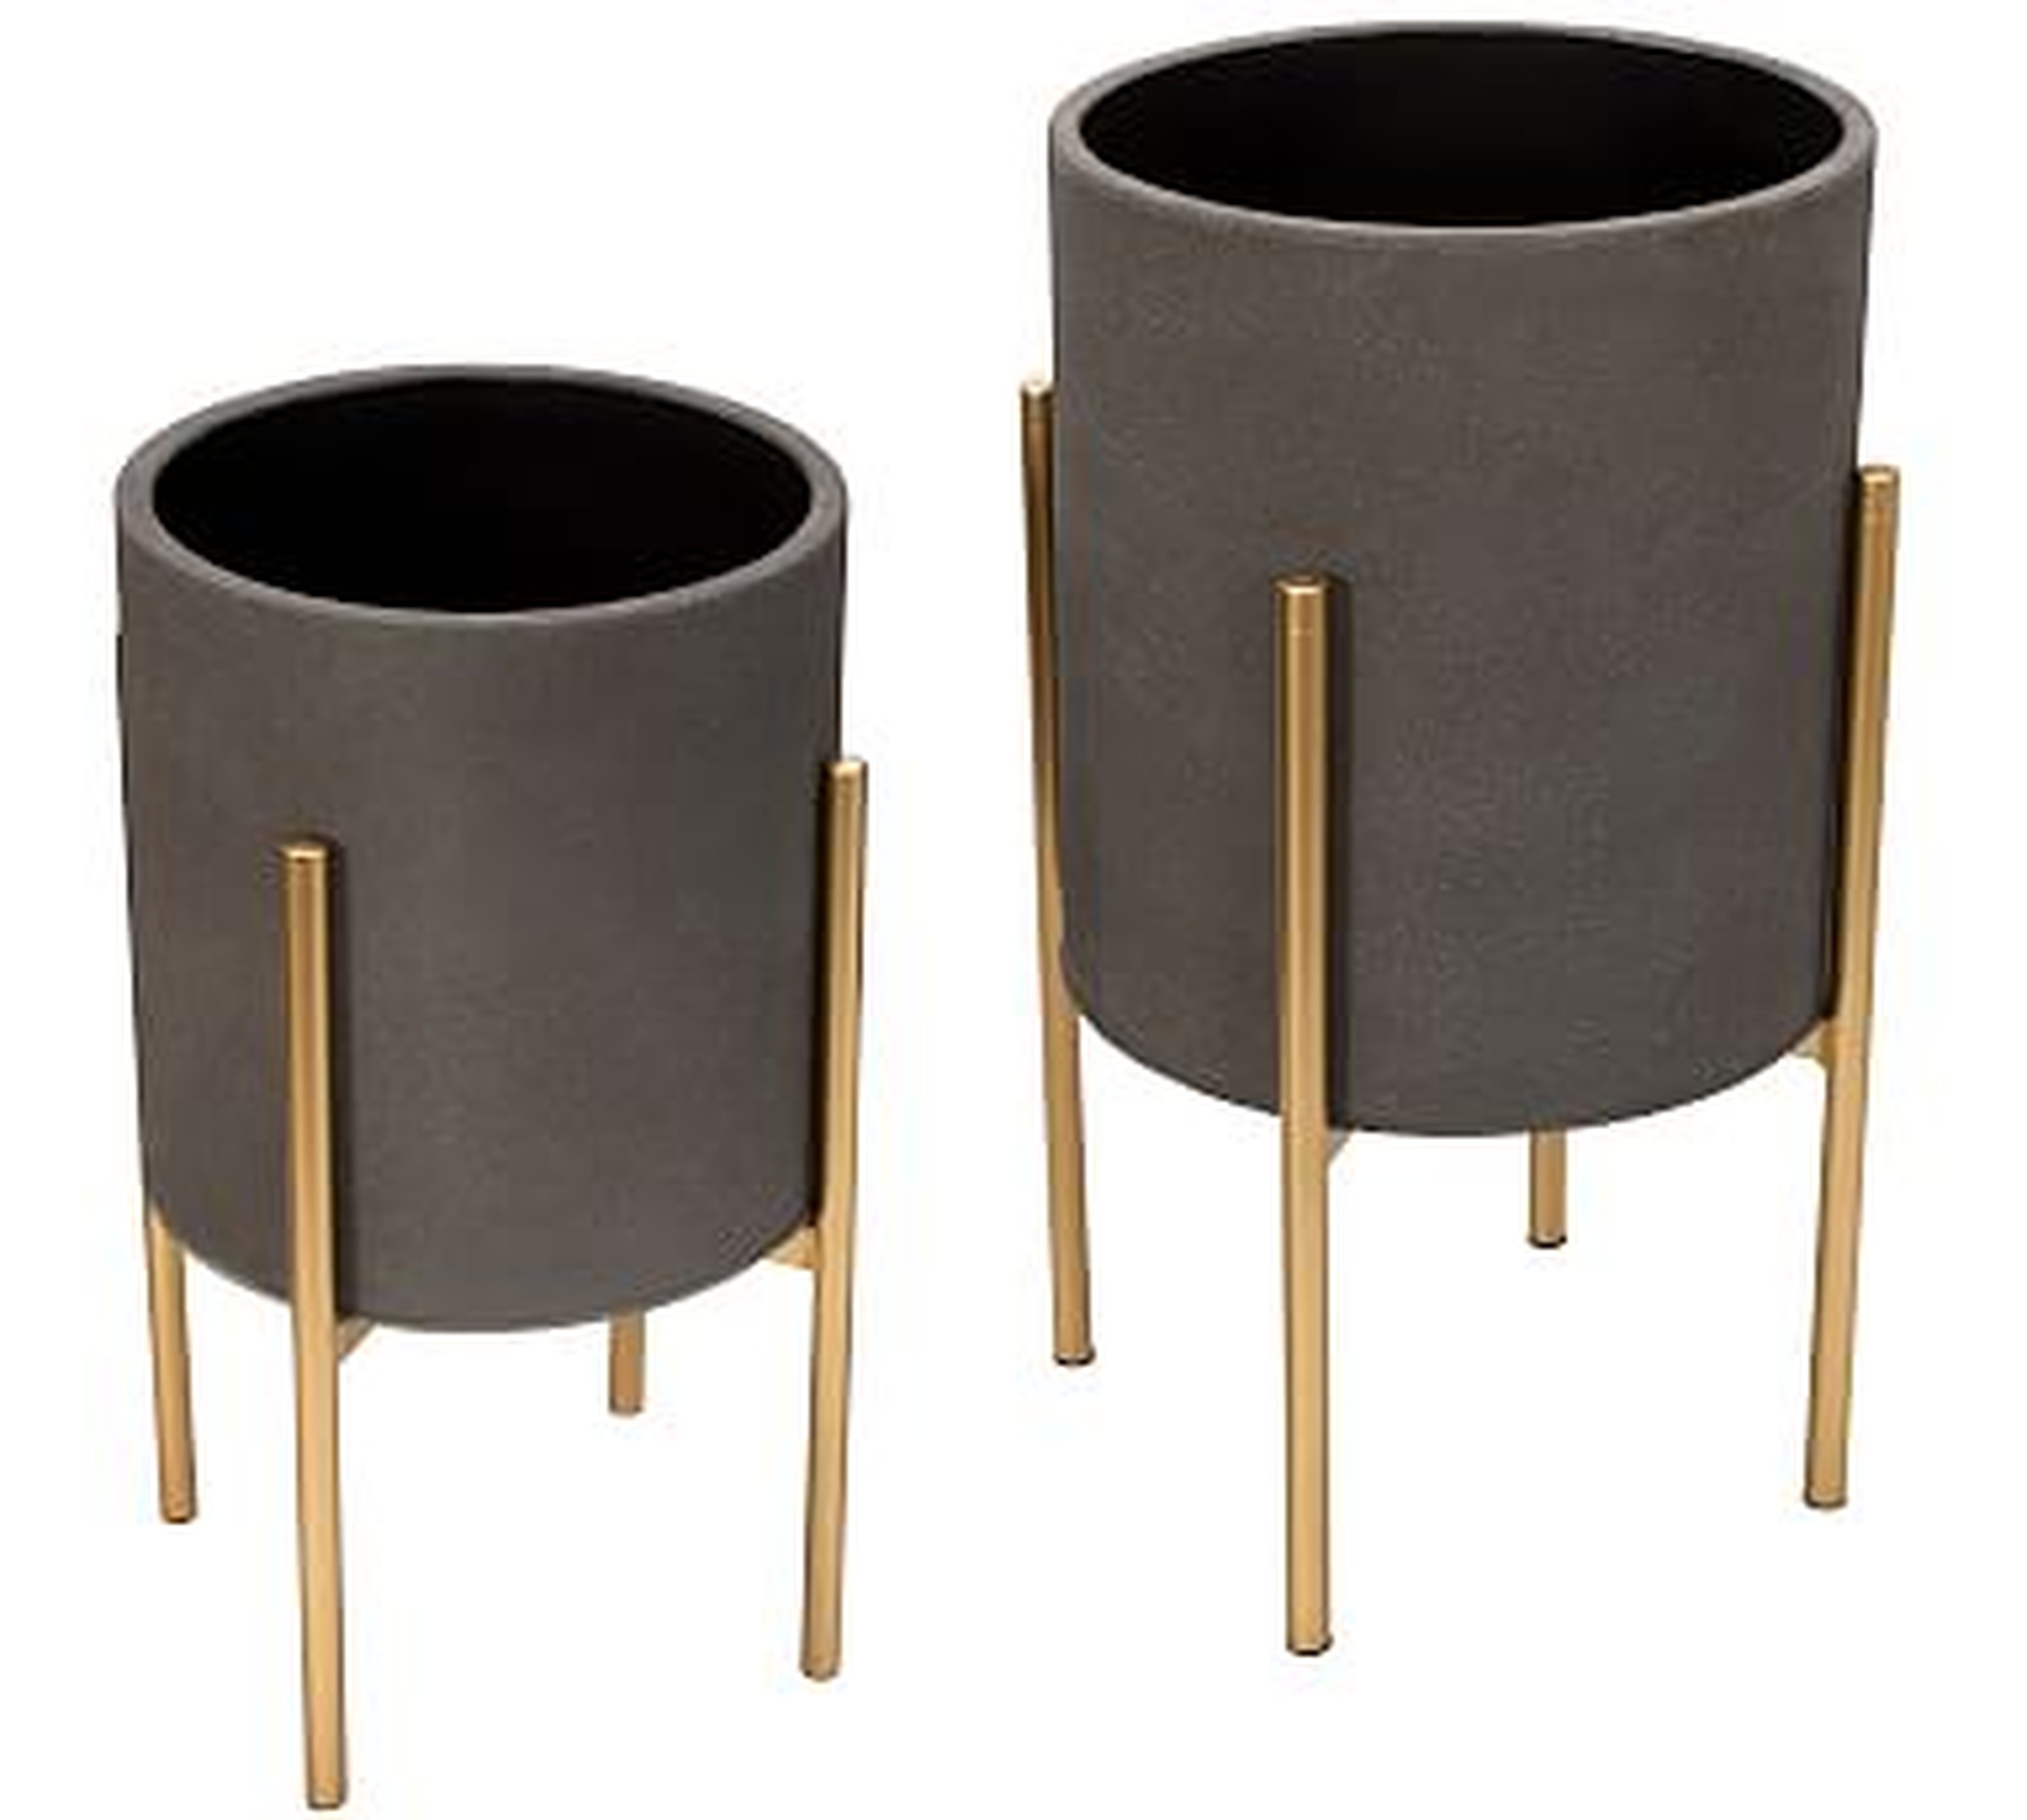 Everly Gray Raised Planters with Gold Stand, Set of 2 - Pottery Barn